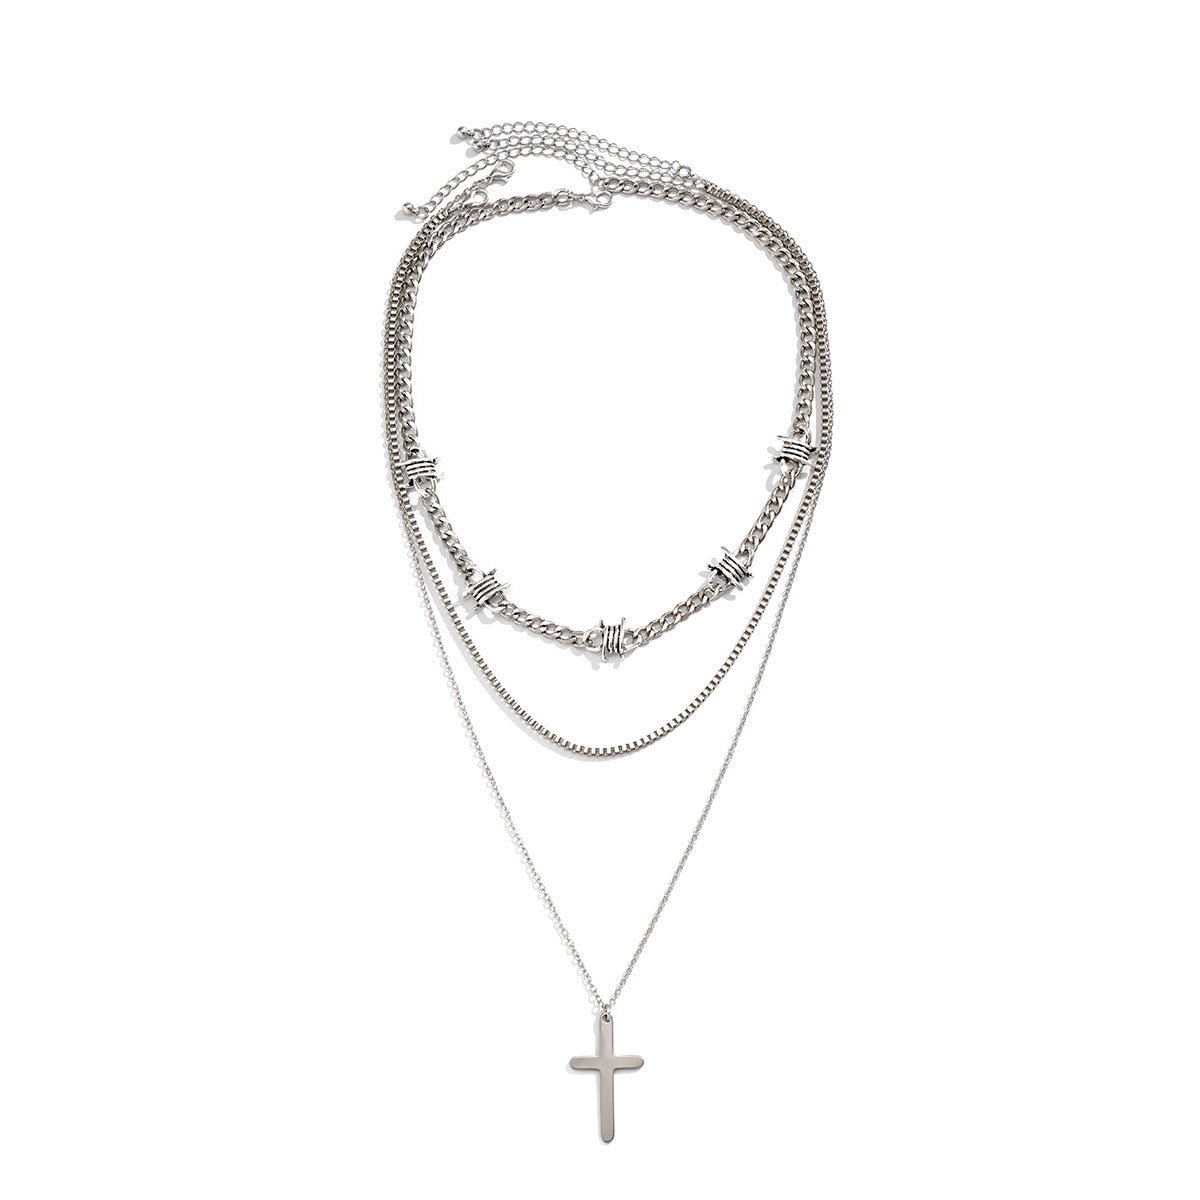 Fashionable and simple hip-hop style three-tiered pearl cross design necklace - JuVons